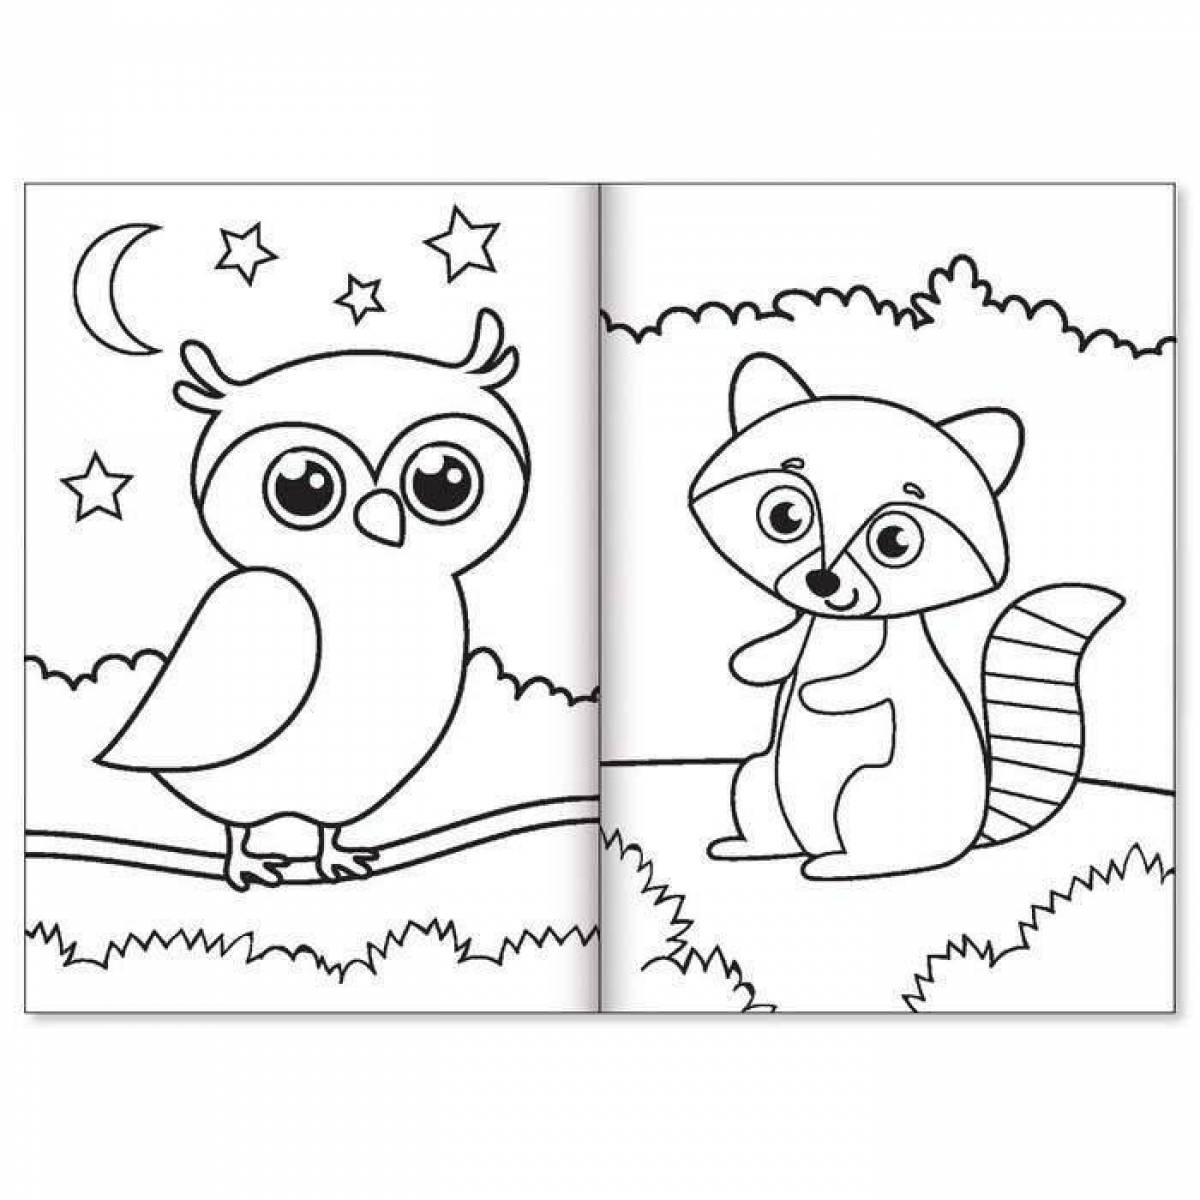 Creative coloring page 2